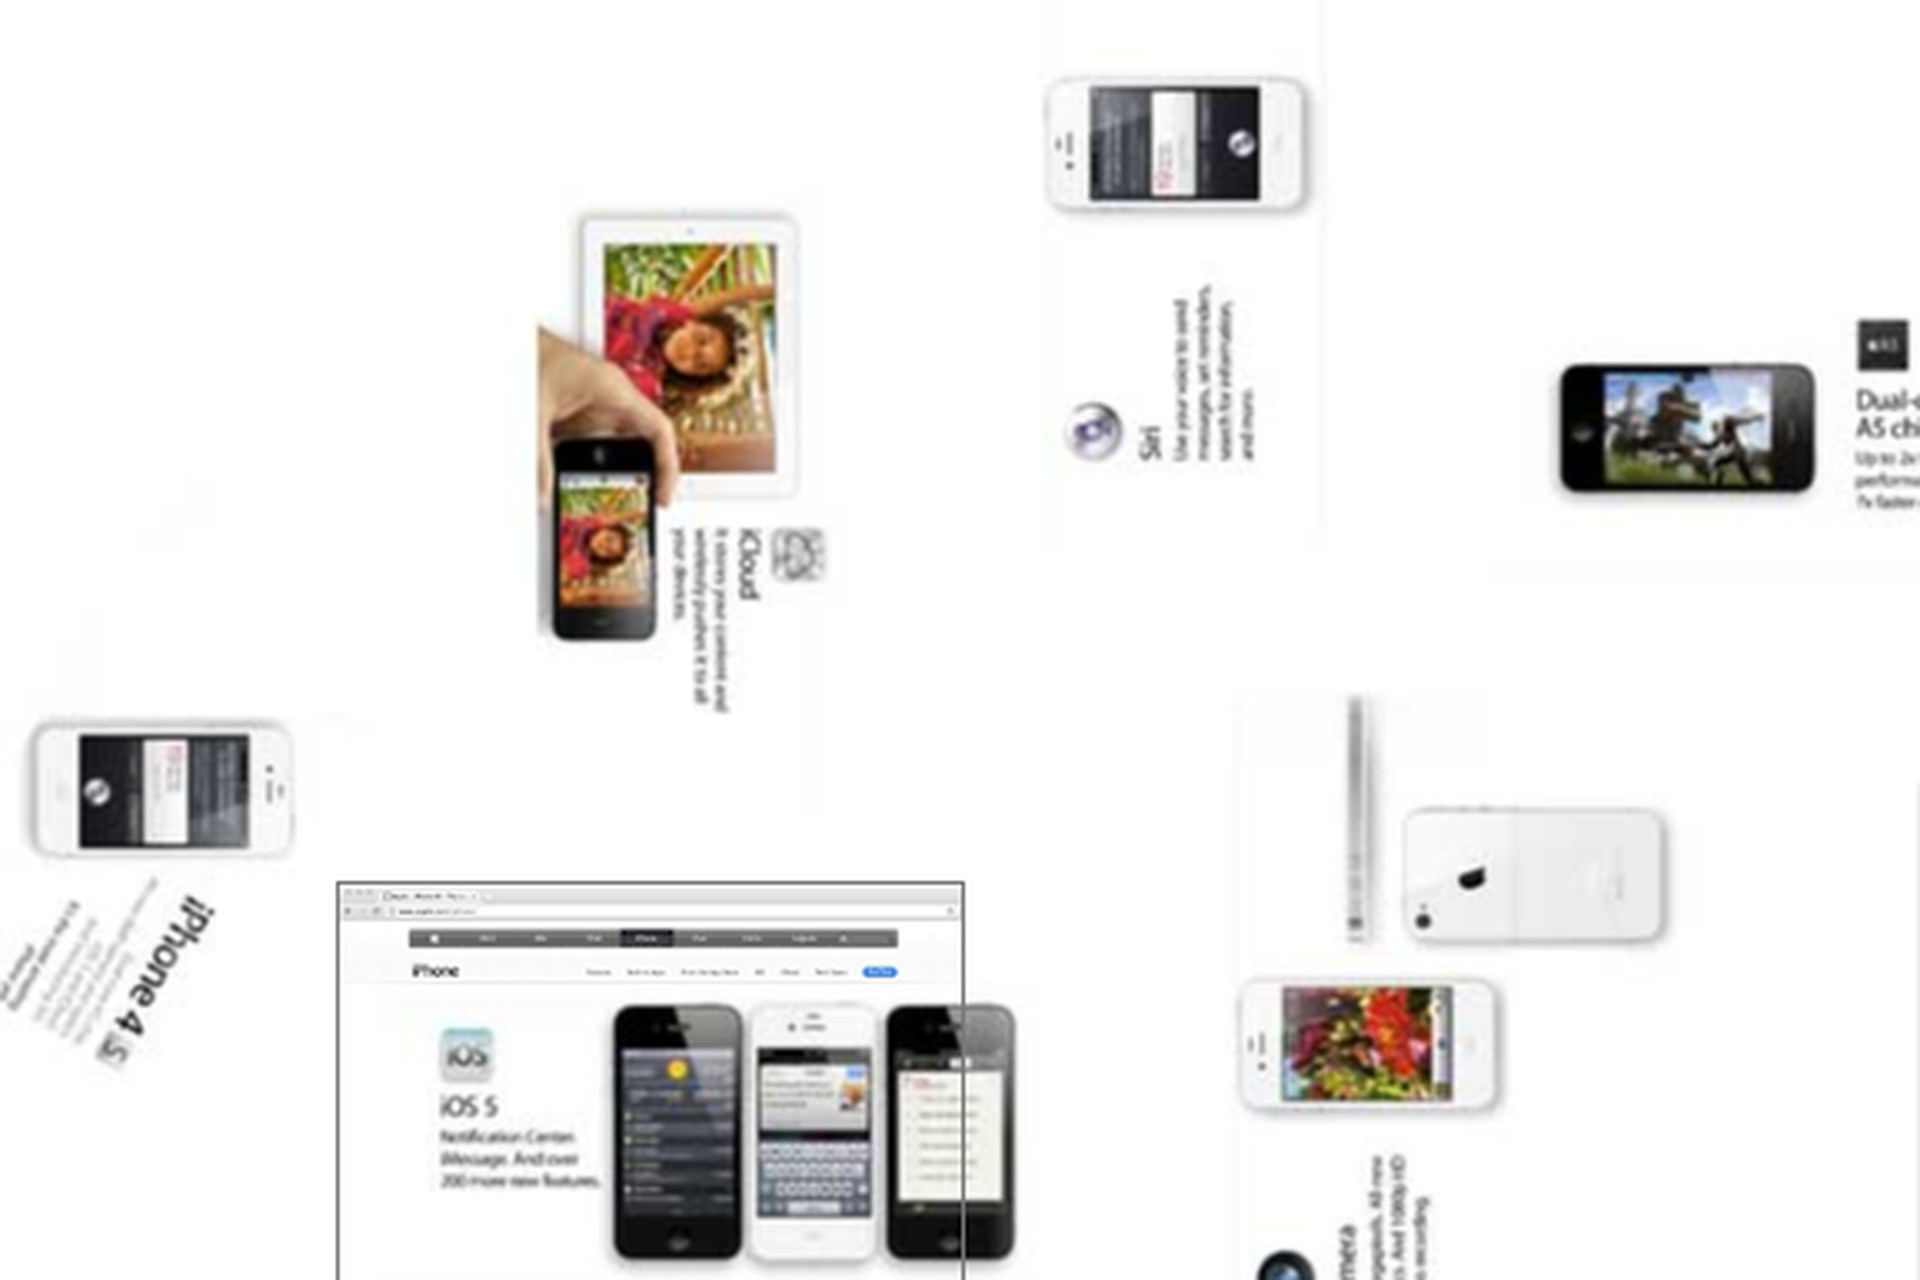 Apple S Iphone 4s Css Animation Shows Extra Design Detail The Verge